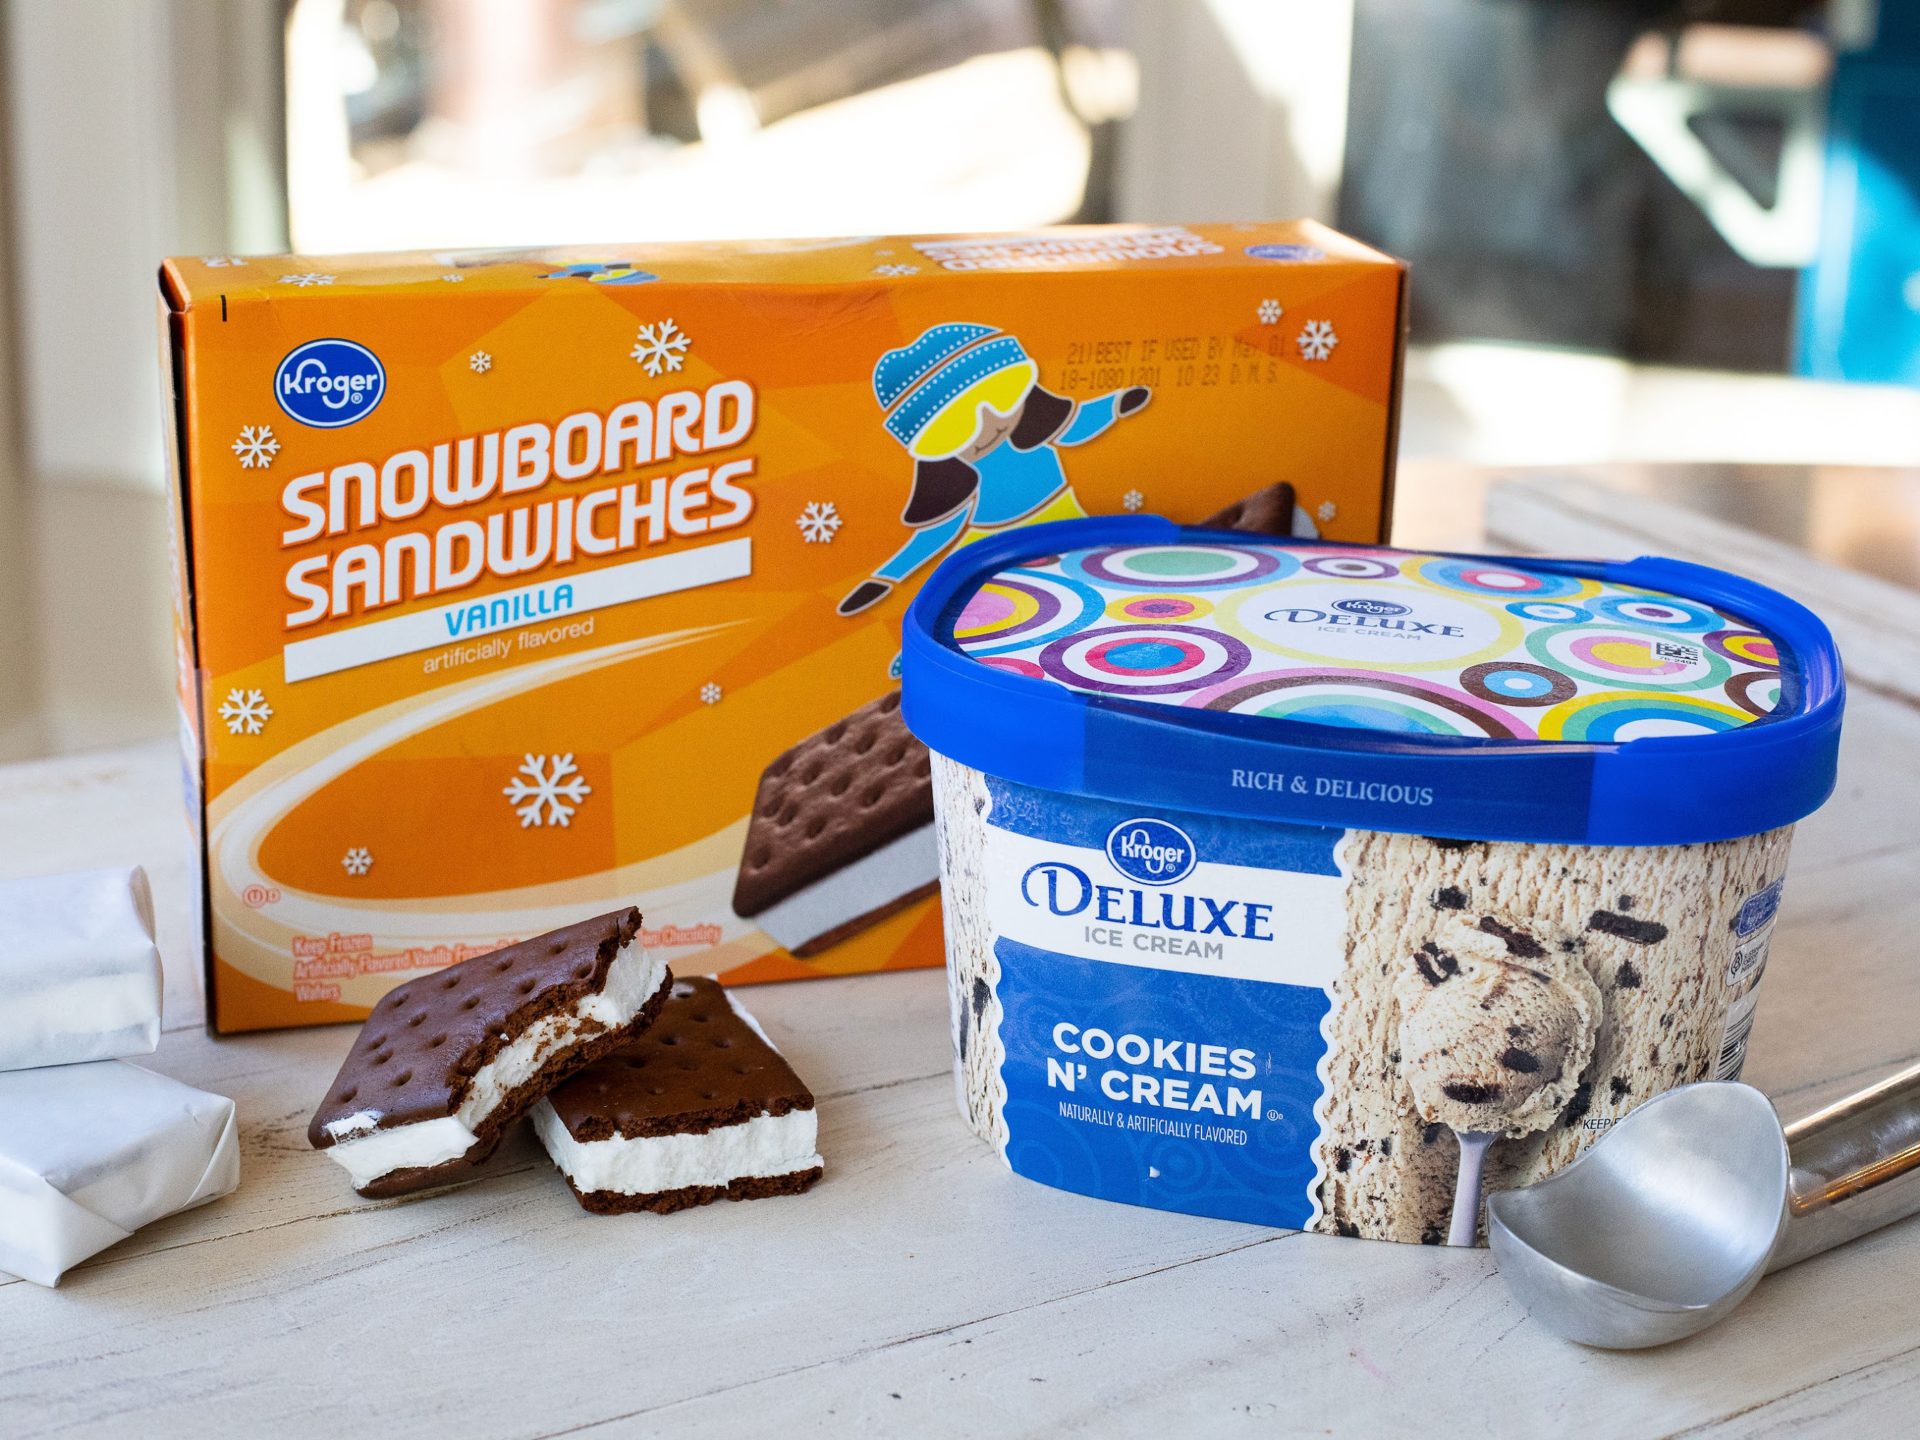 Kroger Ice Cream And Ice Cream Sandwiches Just $1.99 At Kroger